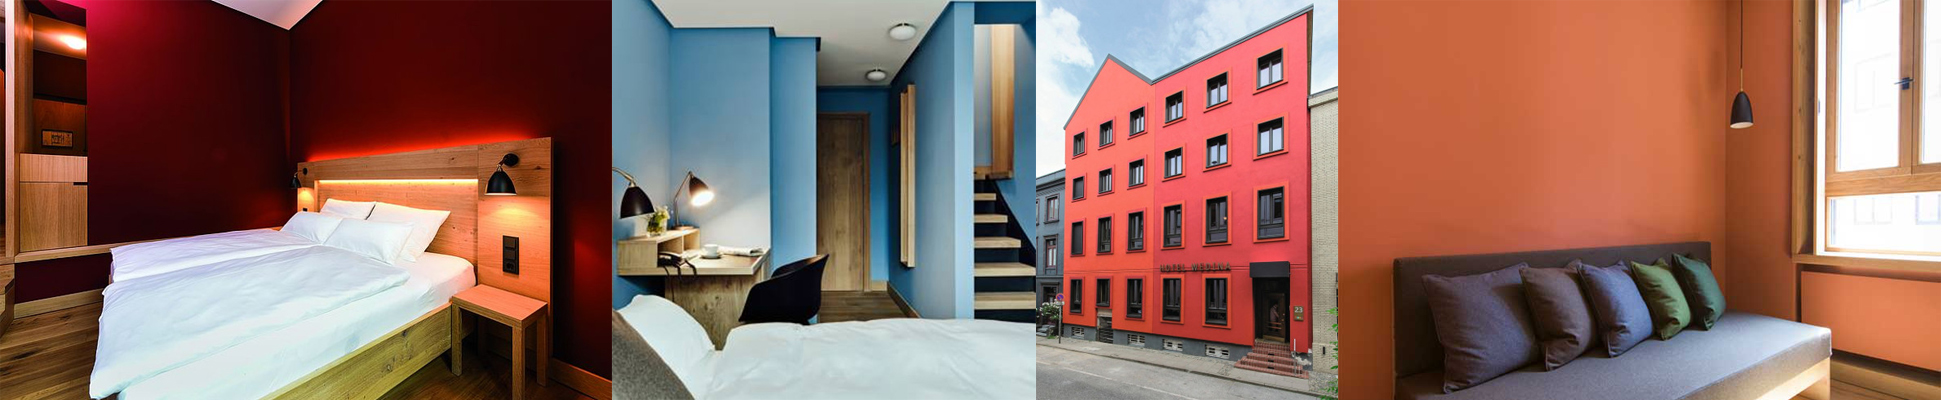 collage of building interiors and exteriors with KEIM paint